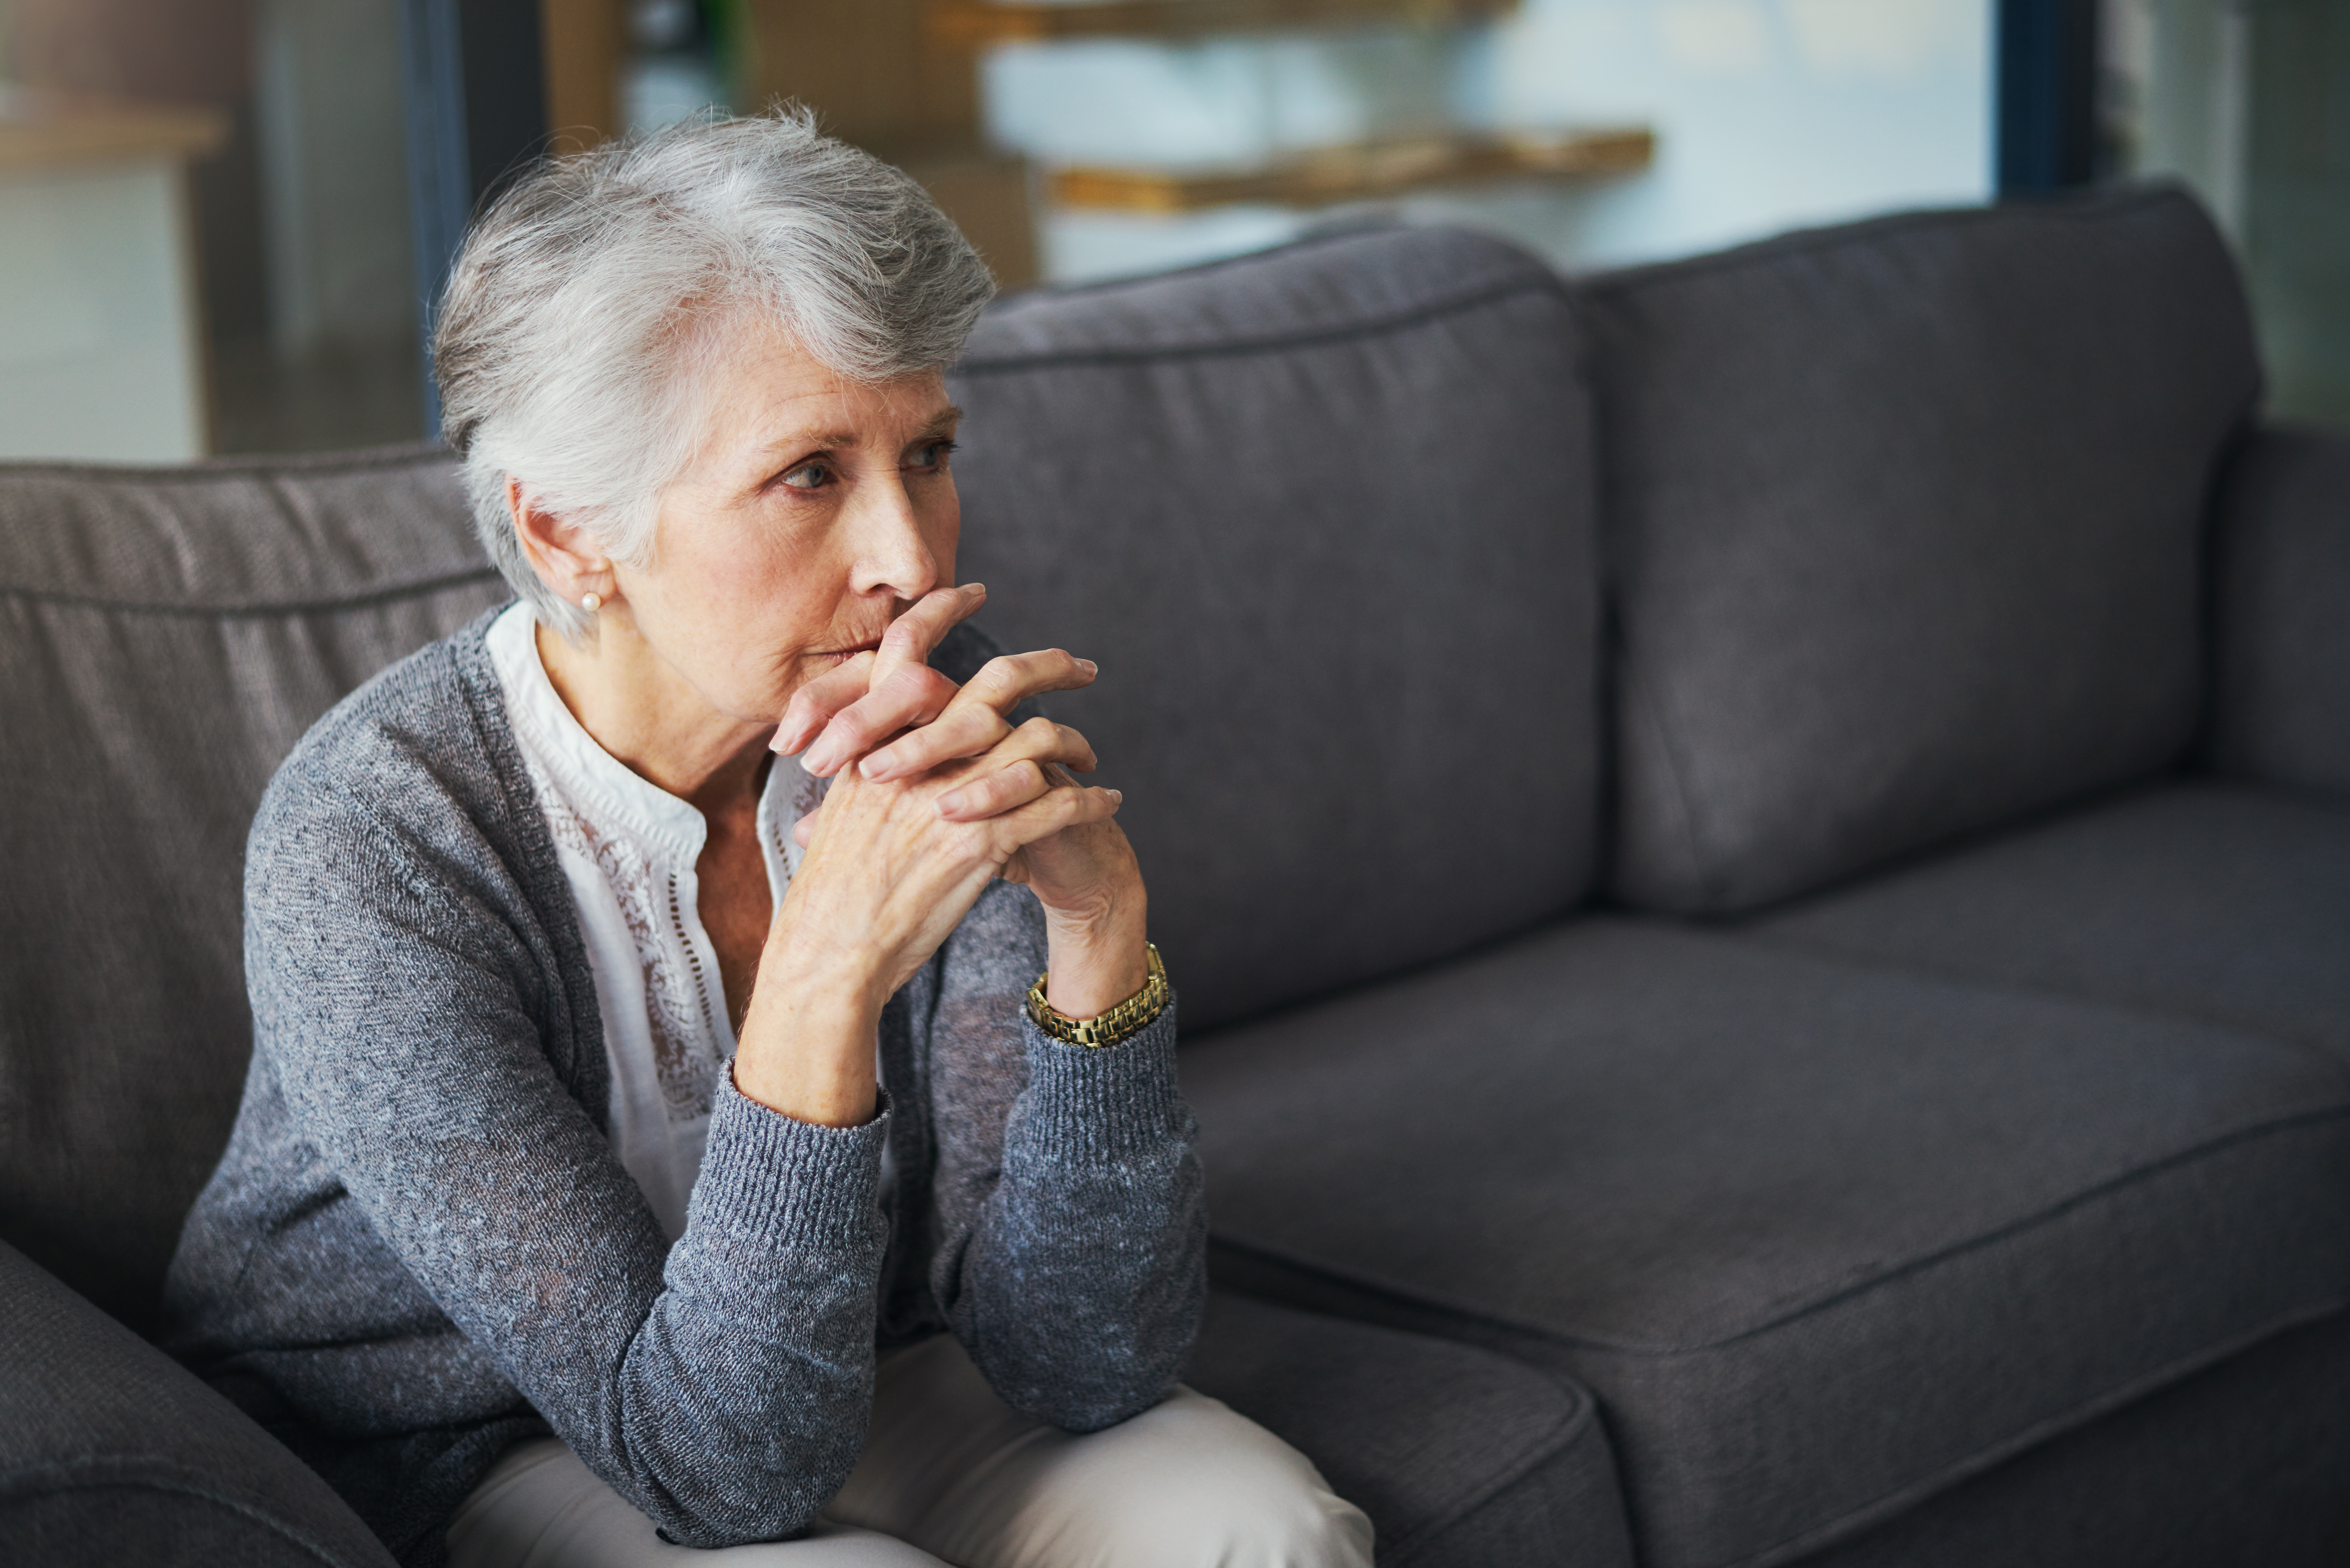 A sad-looking older woman | Source: Getty Images